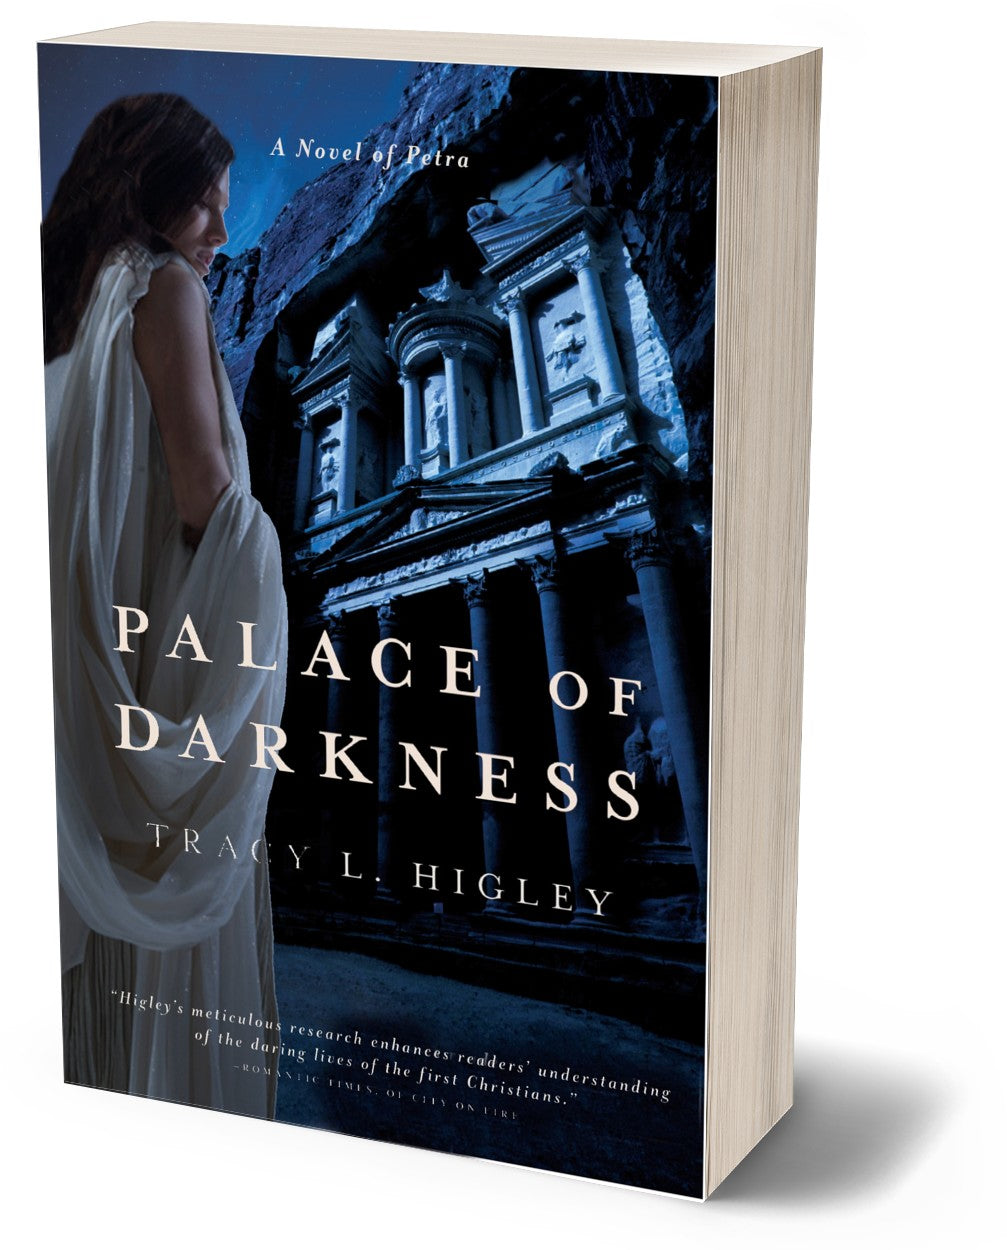 Palace of Darkness (paperback, previous cover)